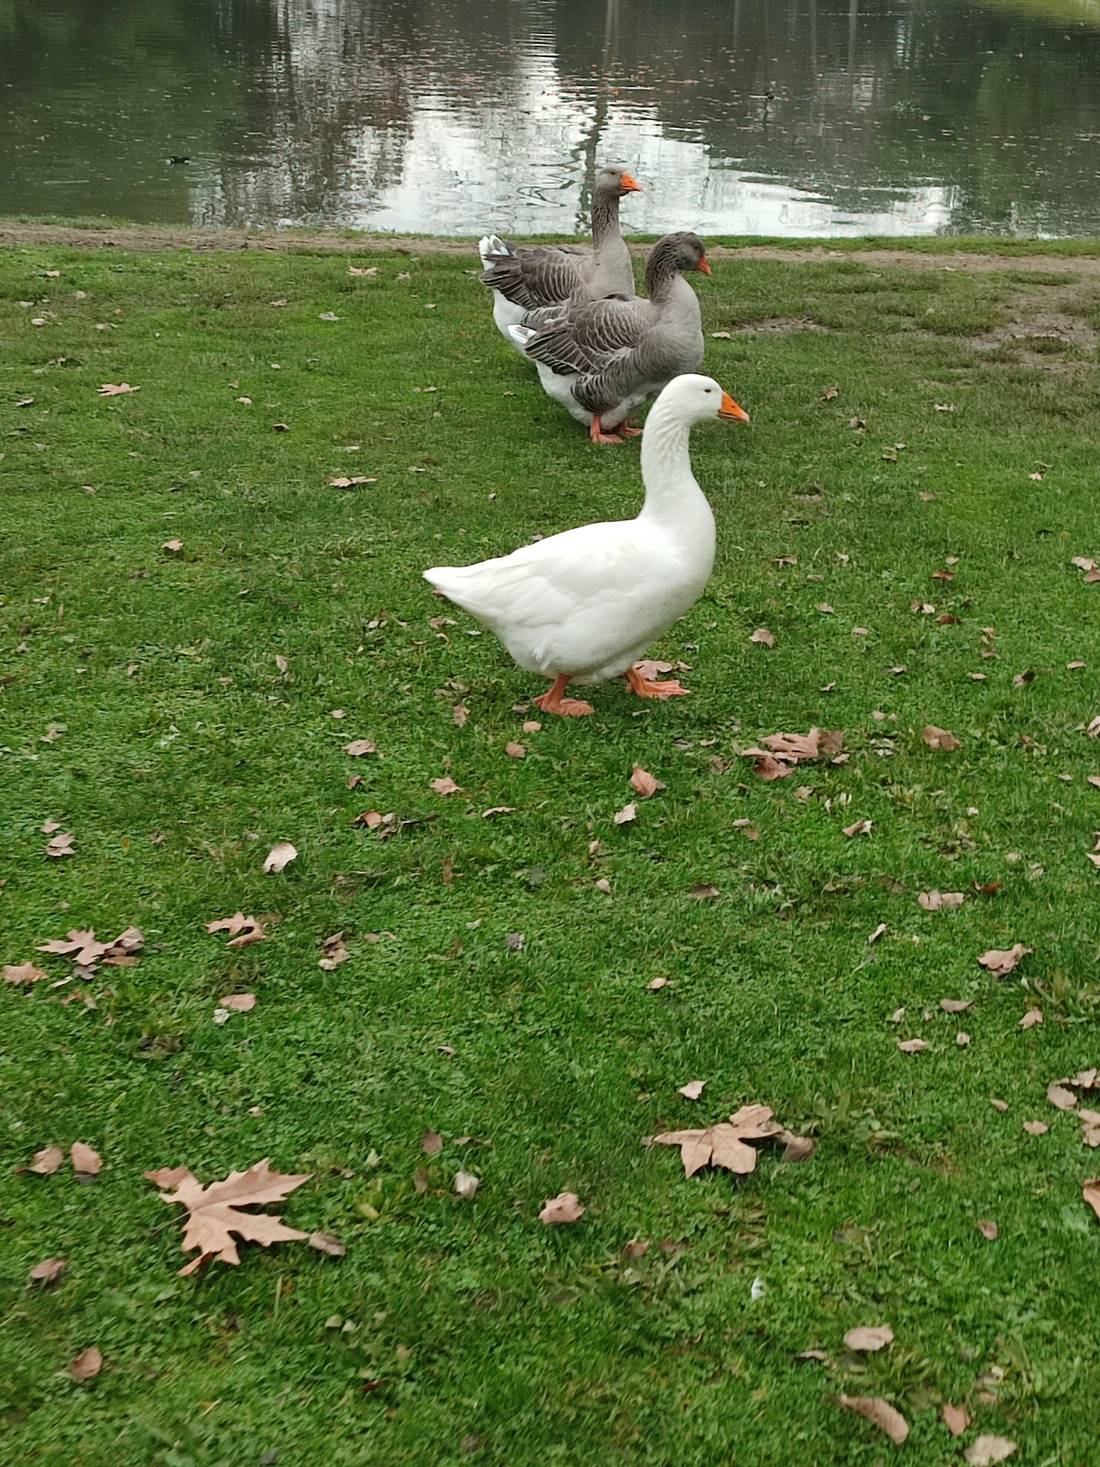 The ducks are really friendly and also a little bit scary there is one that run to me and I Was scared ah ah ah